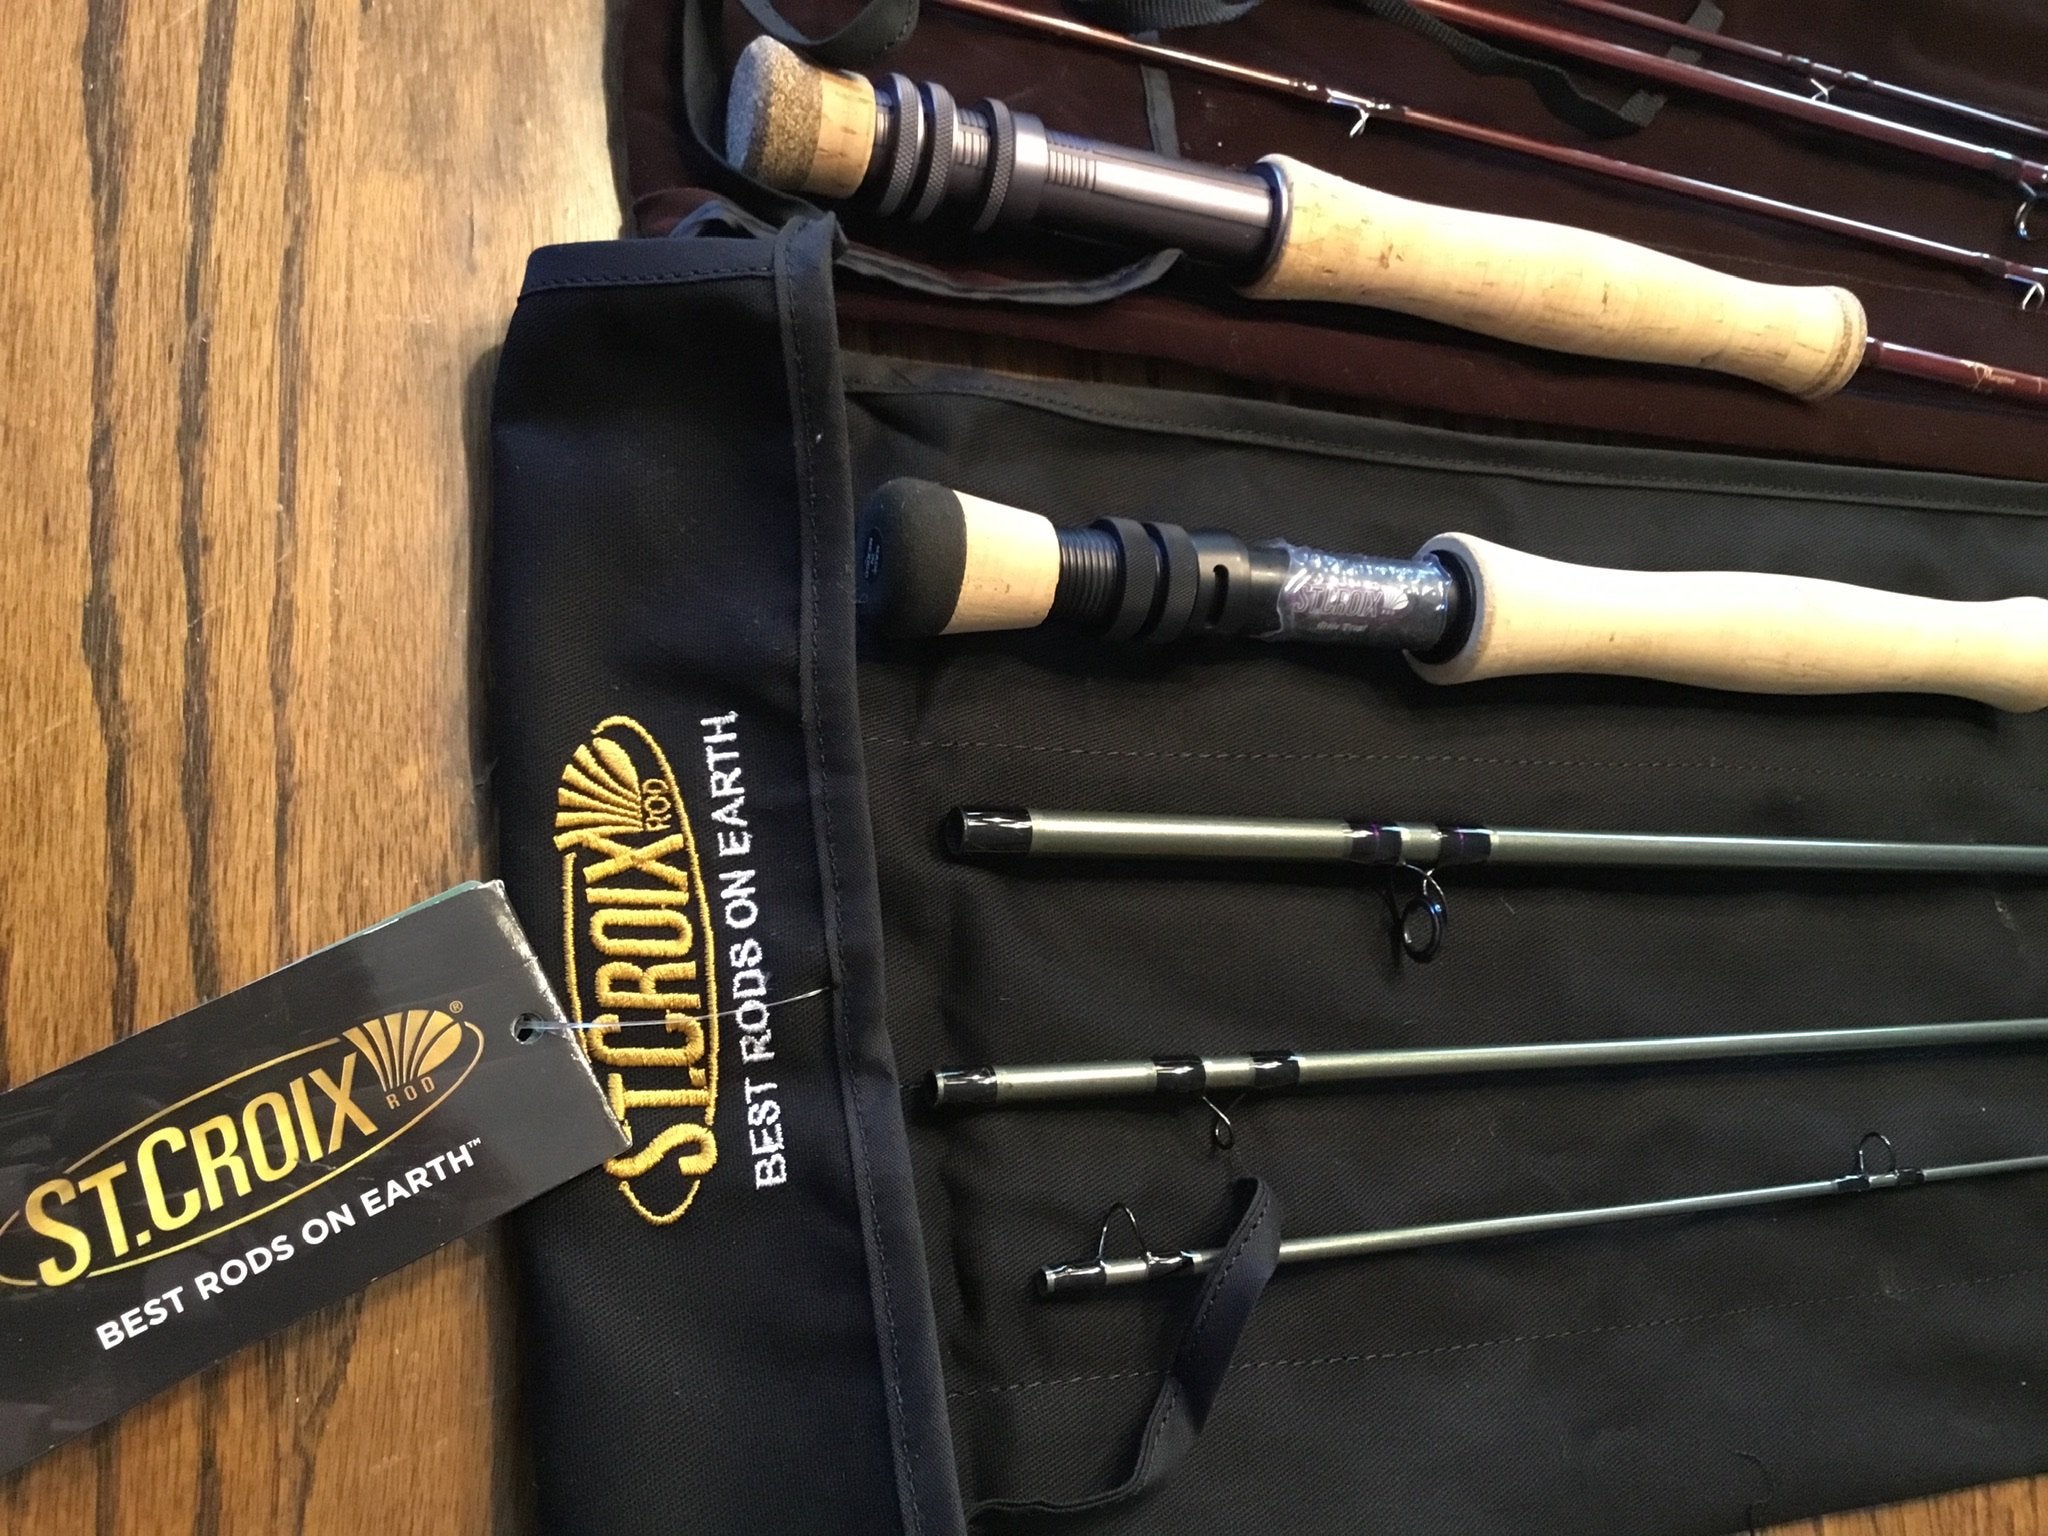 St croix mojo trout fly rod ~ new ~ 7 wt ~ with warranty card